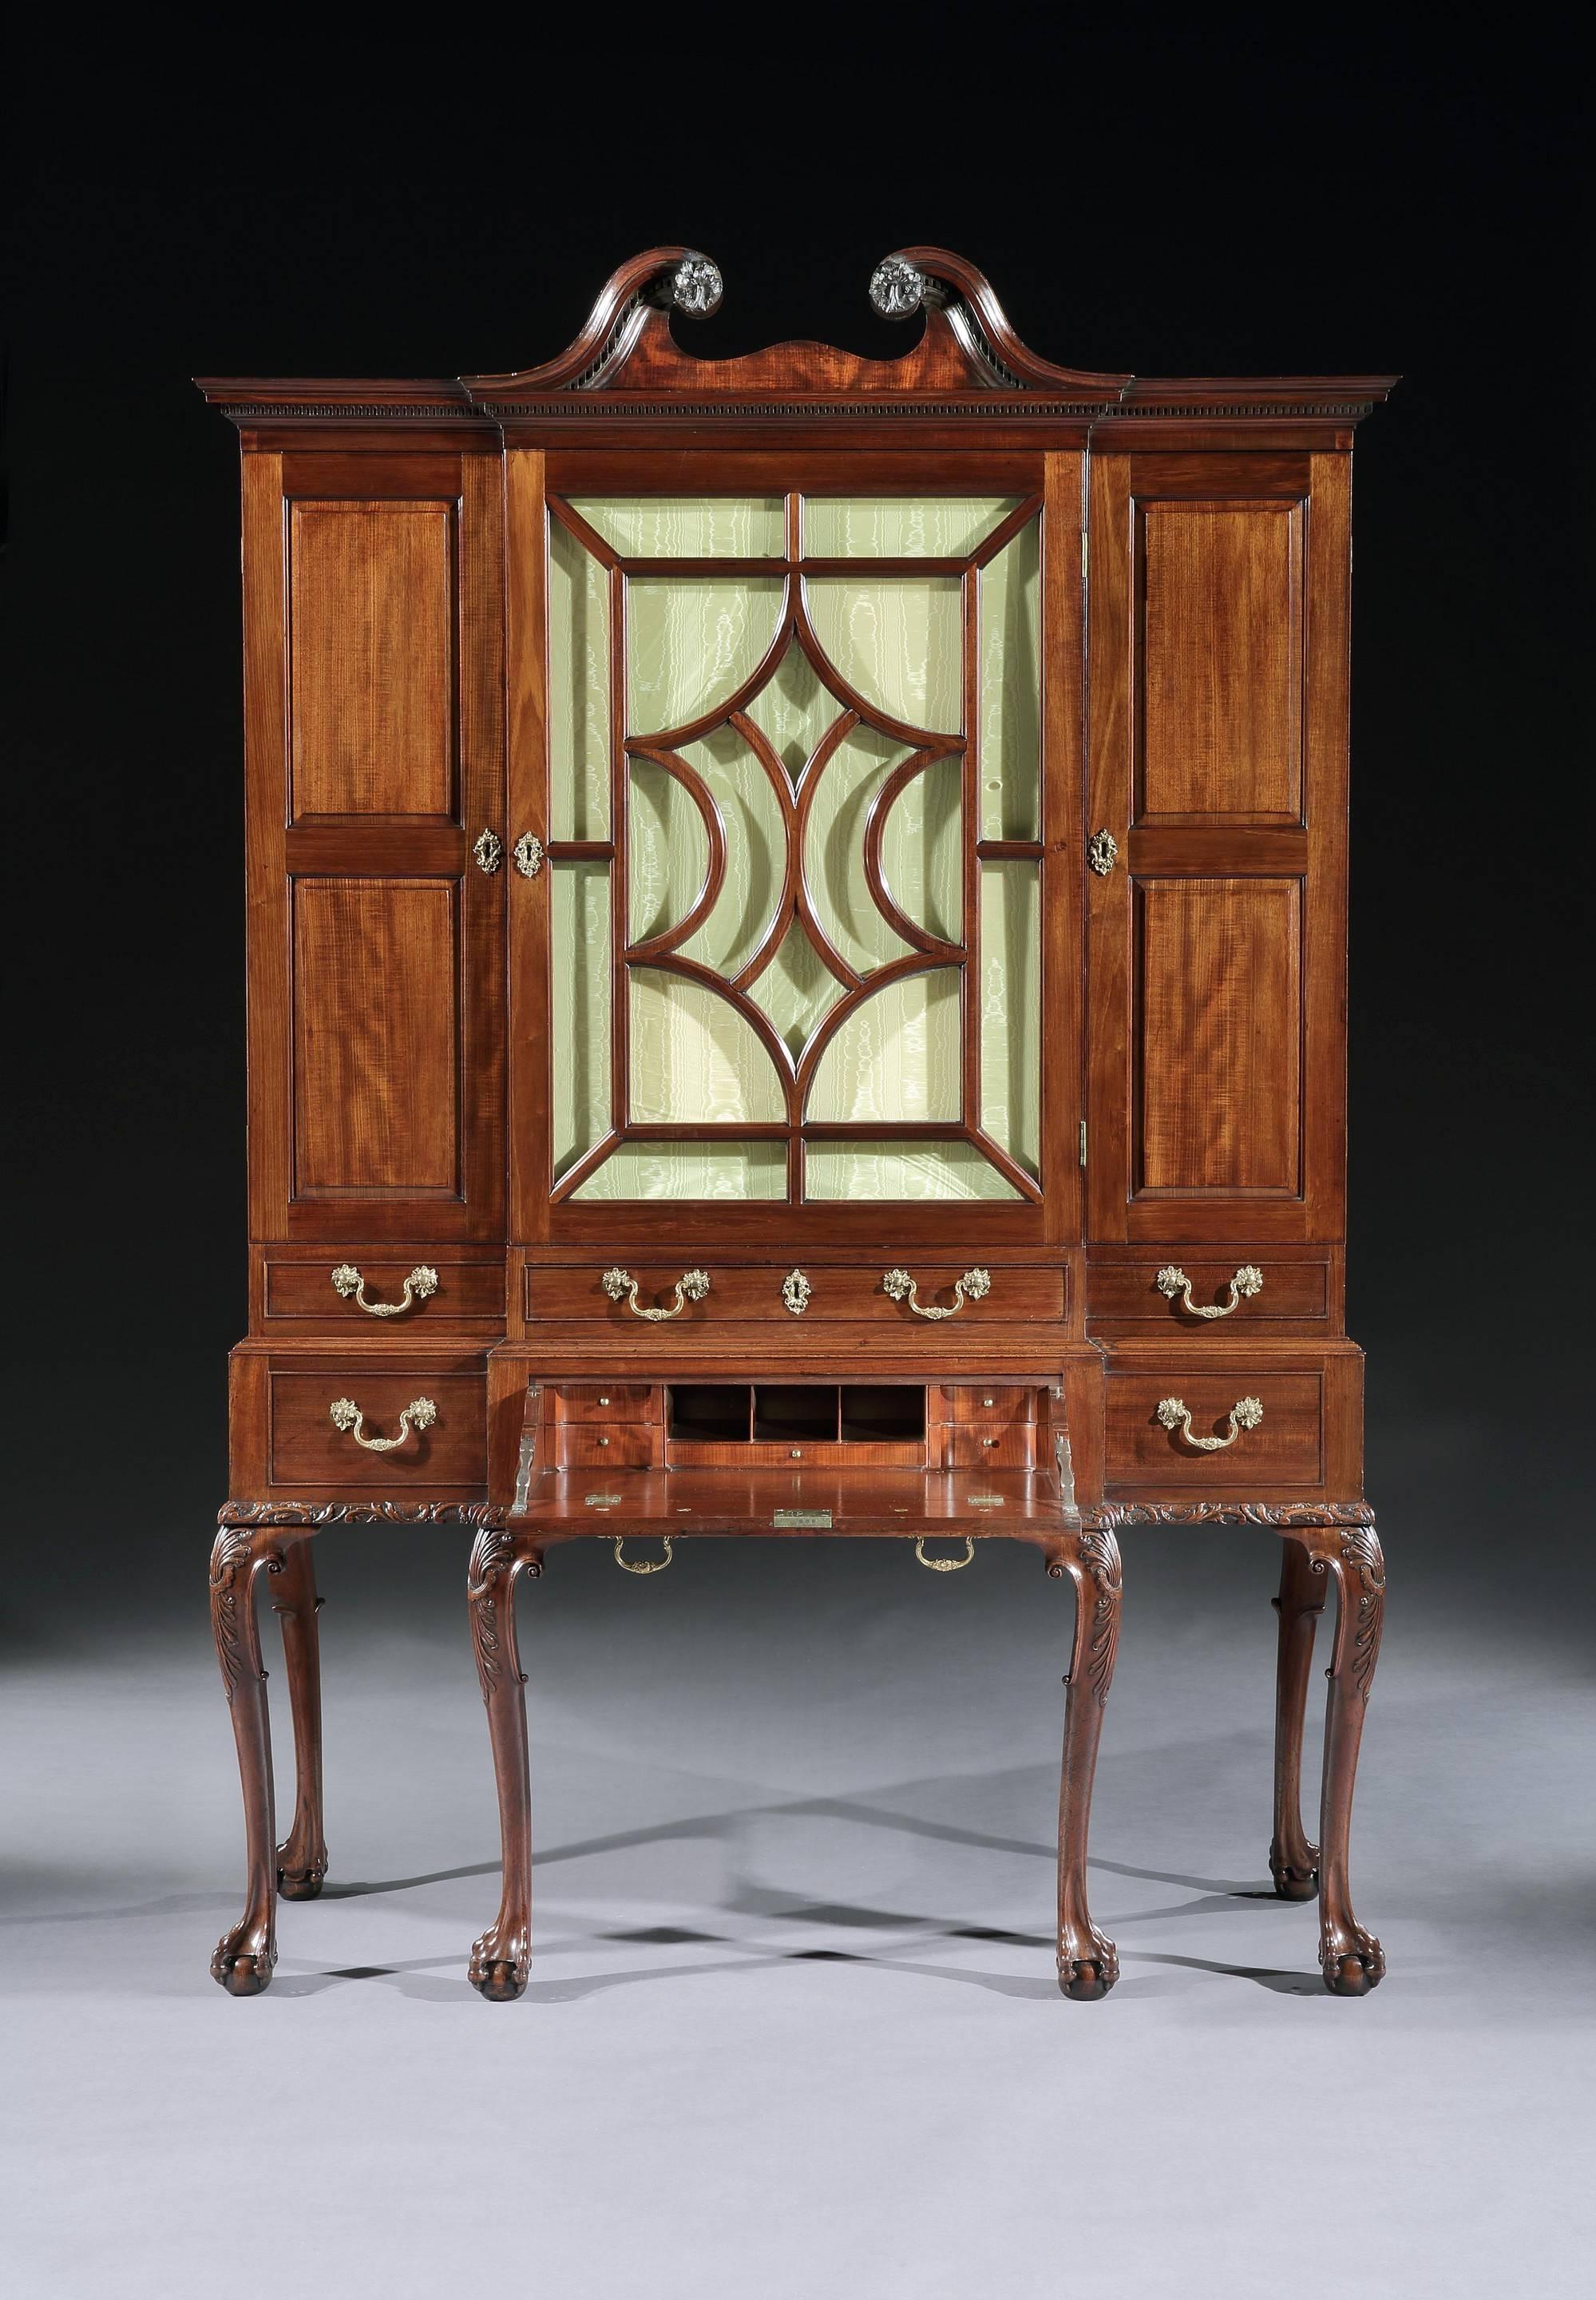 This unusual cabinet belongs to a small group of three sharing a similar design: one of the others, made in walnut, was formerly in the Percival D. Griffiths Collection, and the third, made in mahogany, was formerly in the Moller Collection. 

The